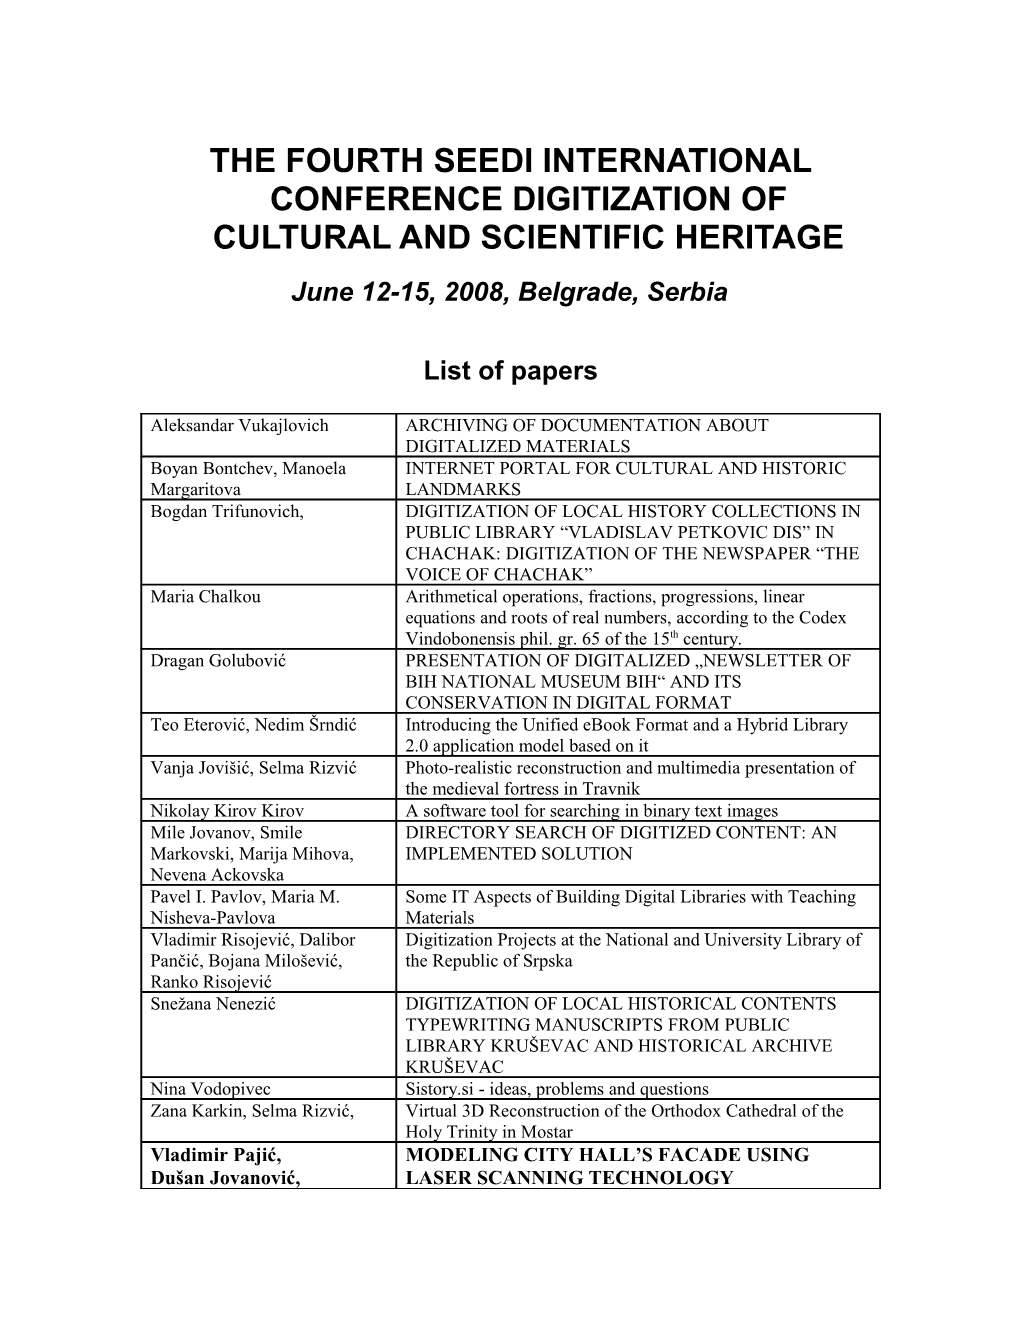 The Fourth Seedi International Conference Digitization of Cultural and Scientific Heritage